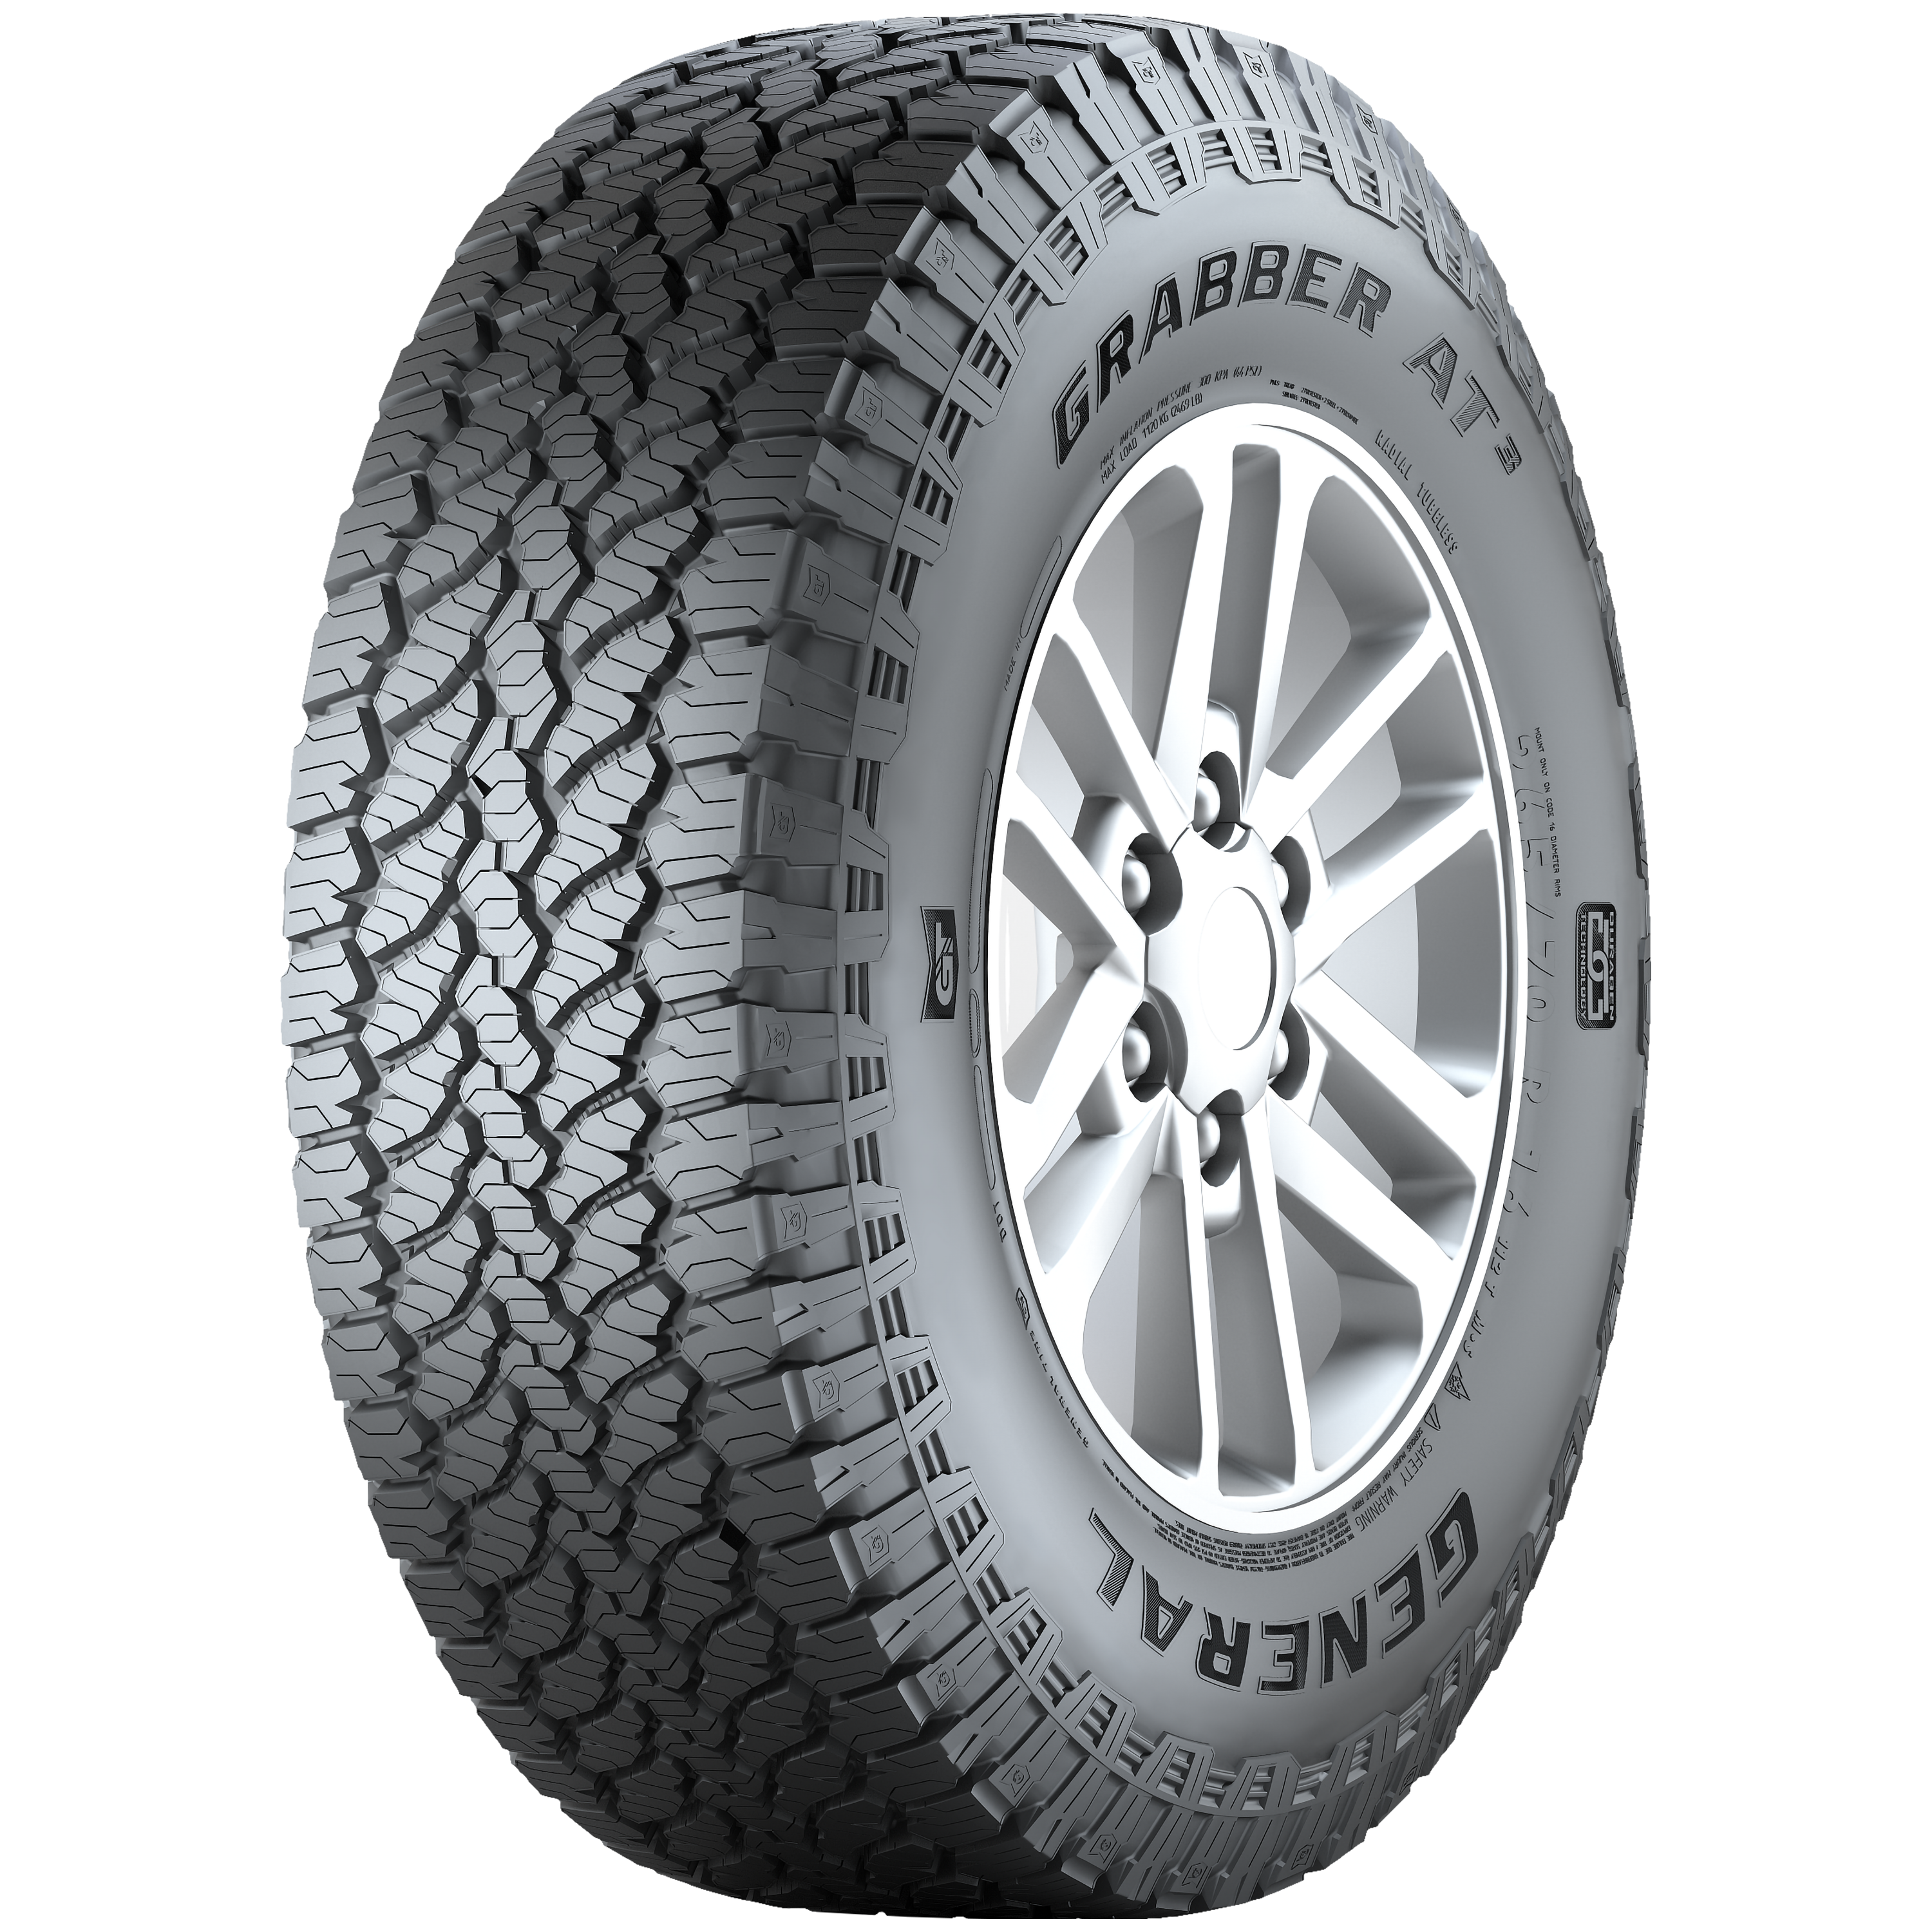 Fitted Wheels and Tyres near me South of England - 4x4 Tyres